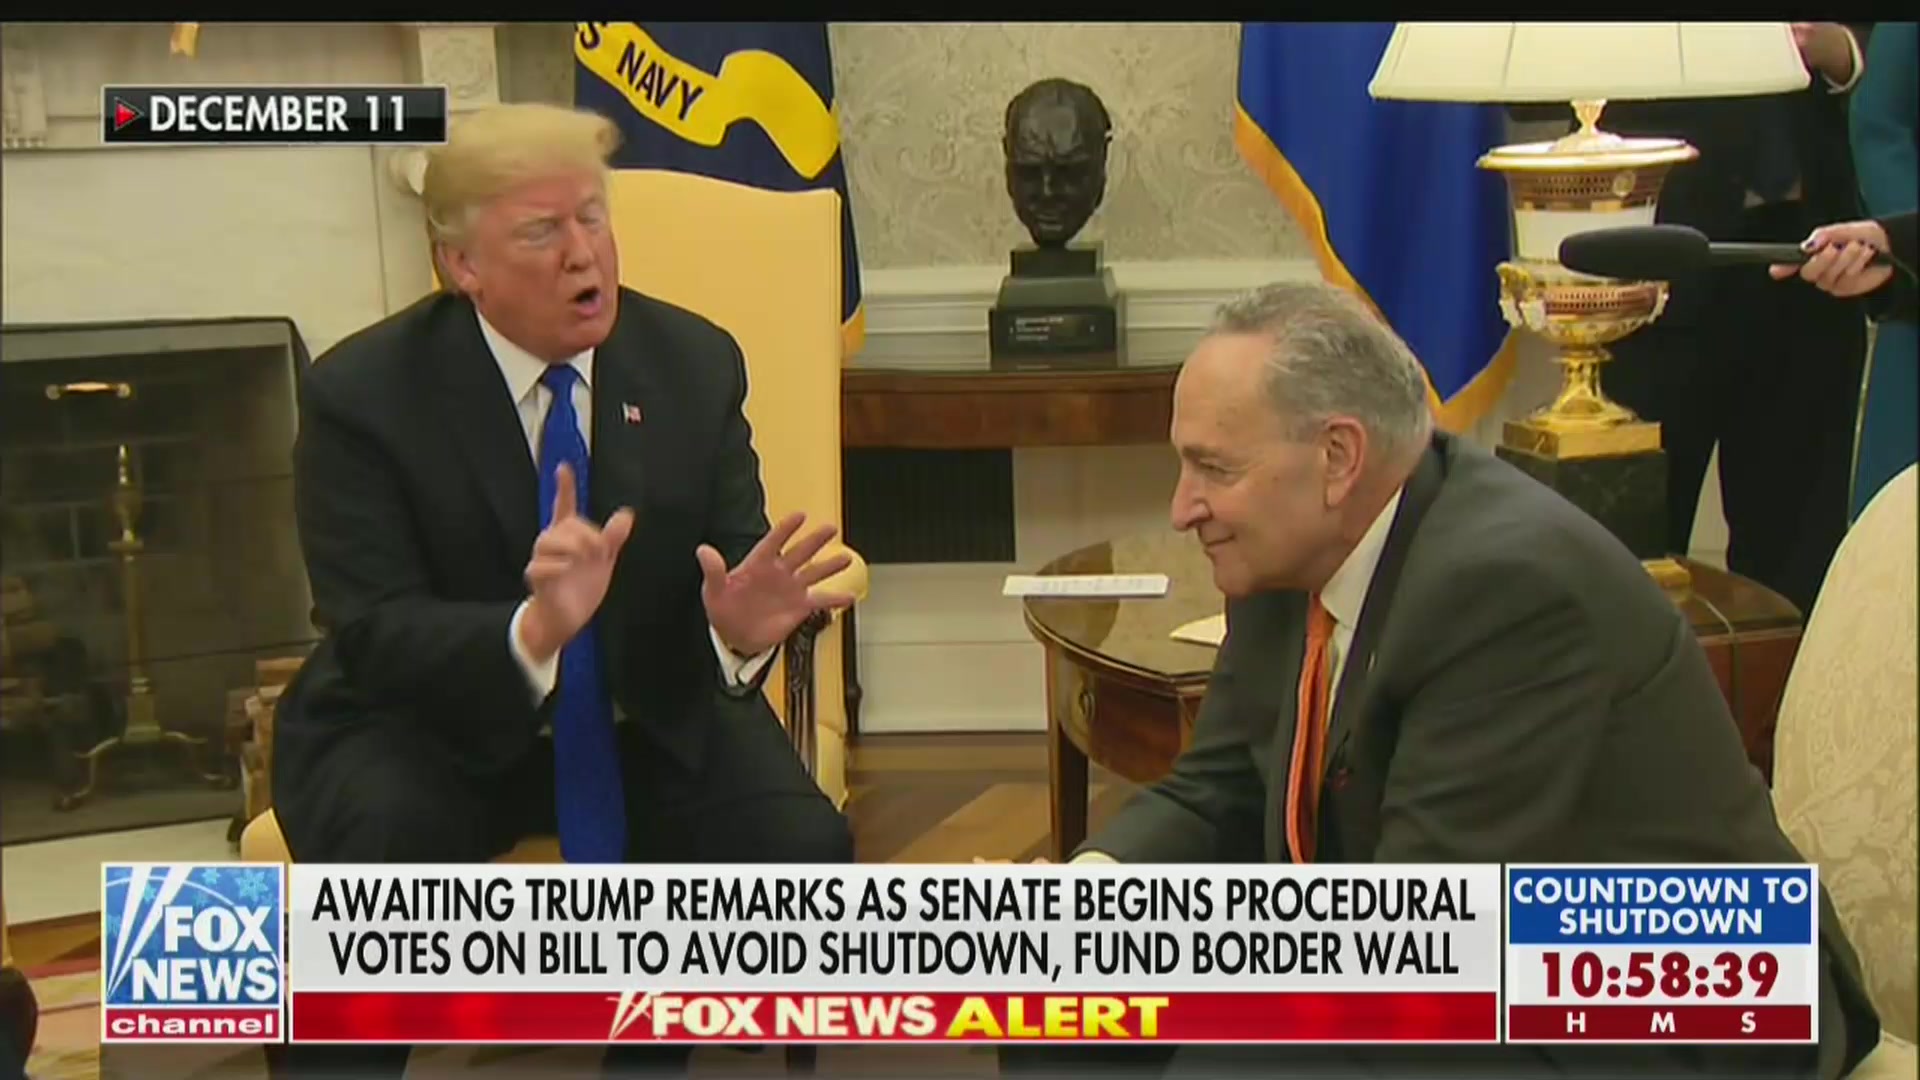 Fox News Reminds Viewers That Trump Said He’d Take Blame For Government Shutdown